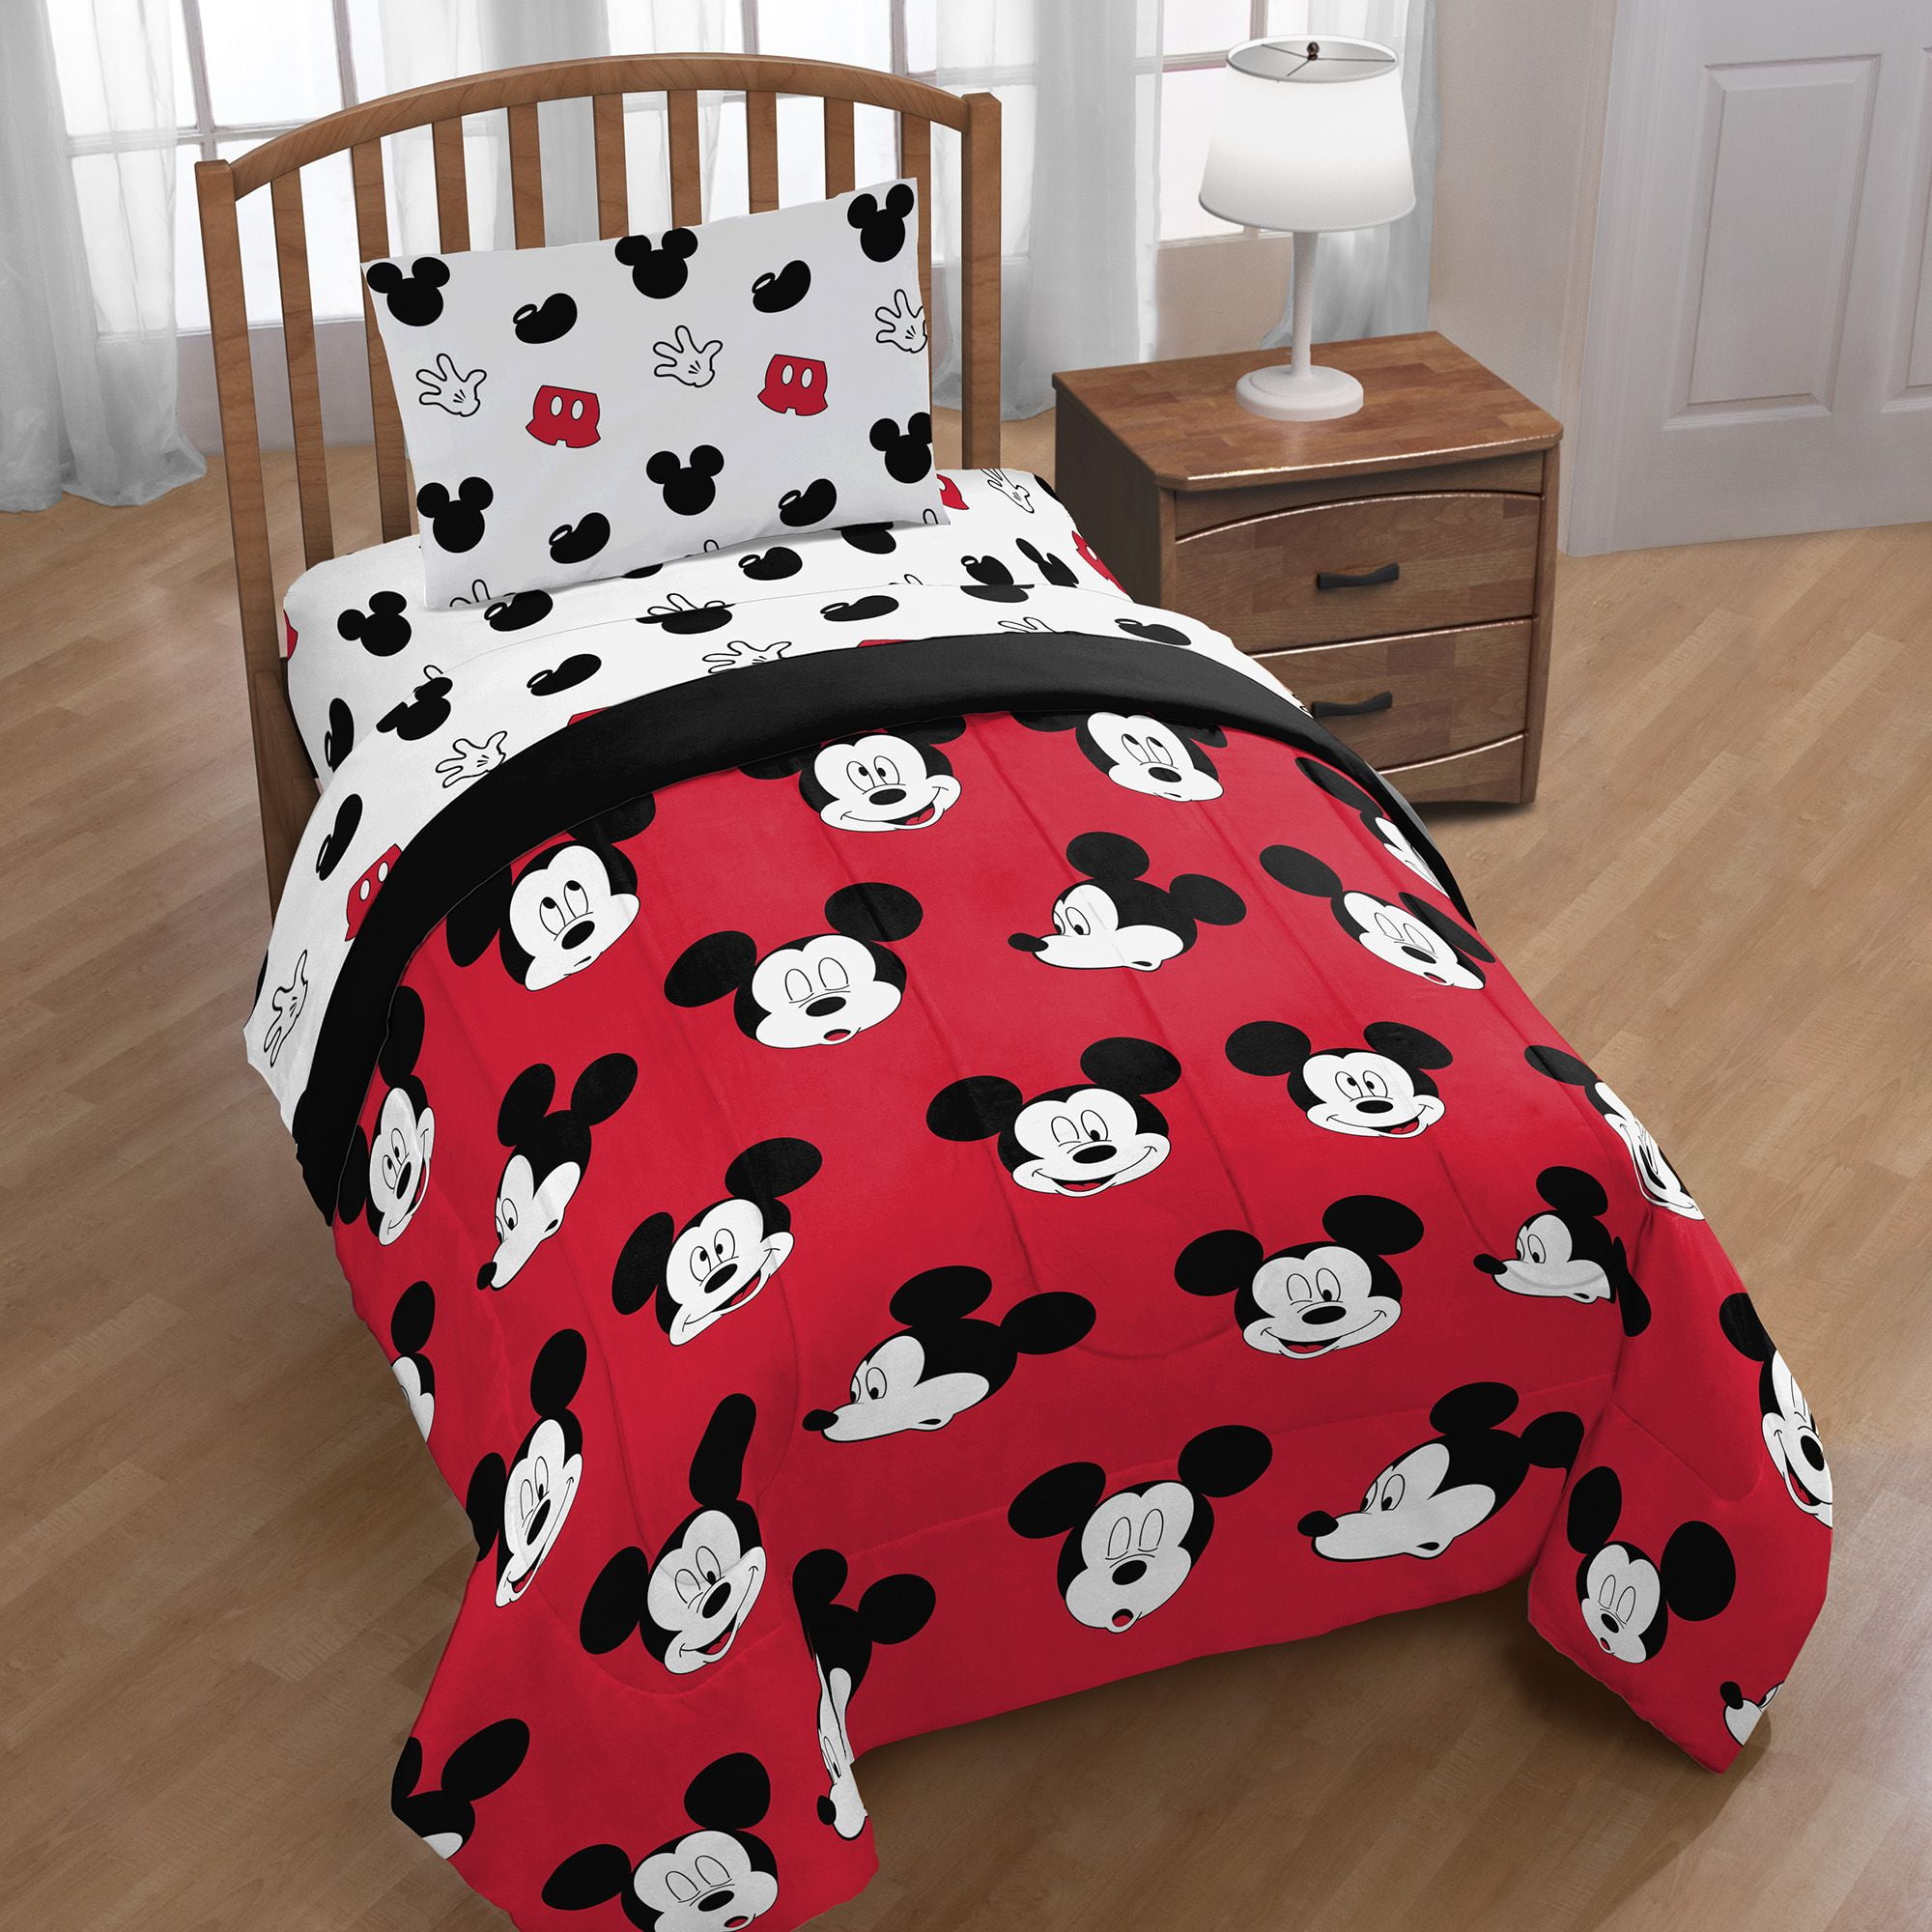 SINGLE BED MICKEY MOUSE BRIGHT DUVET COVER SET FACES RED BLUE GREEN PATCHWORK 